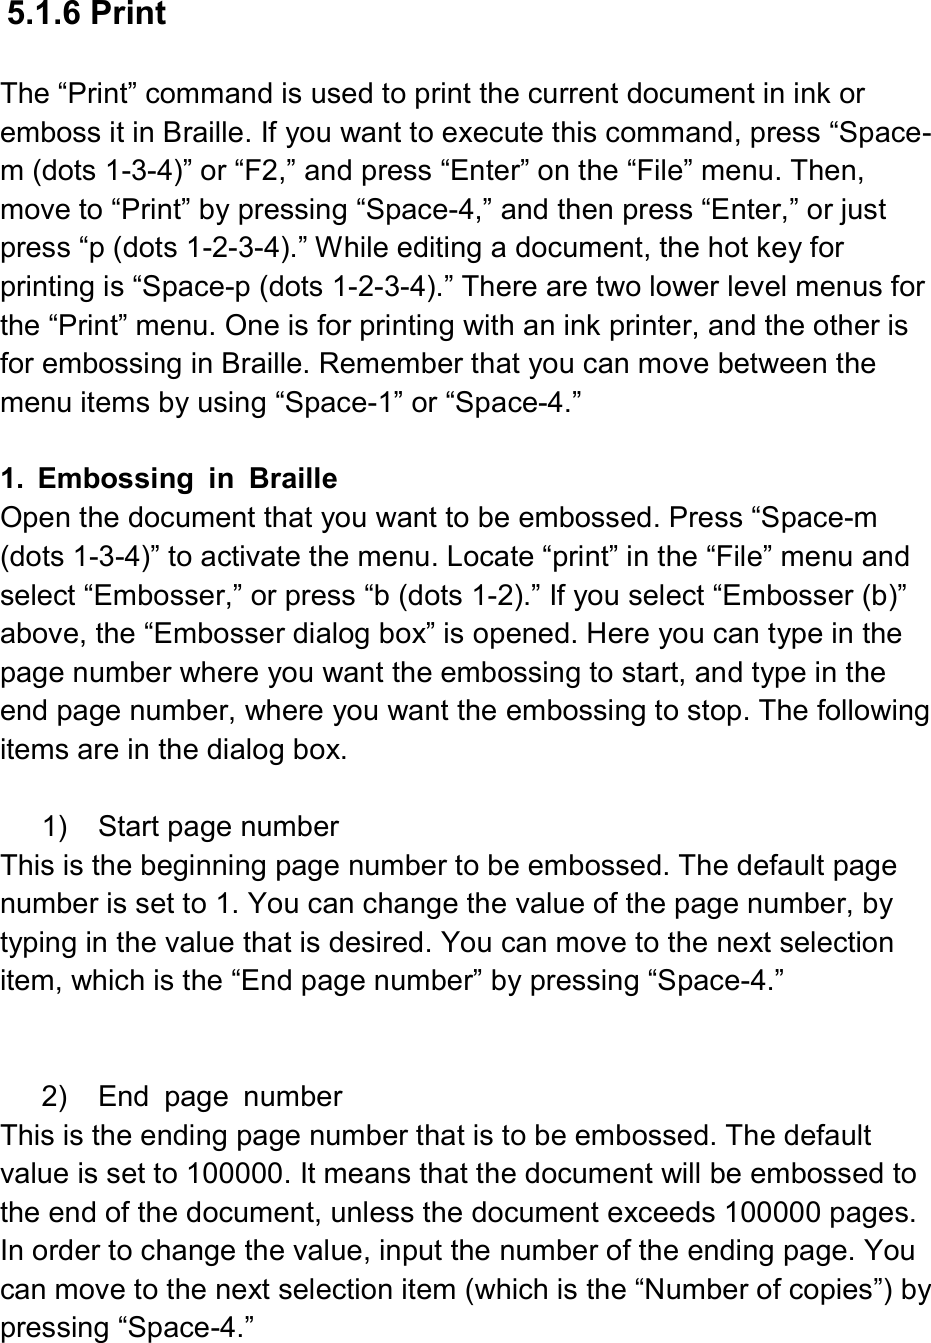   5.1.6 Print  The “Print” command is used to print the current document in ink or emboss it in Braille. If you want to execute this command, press “Space-m (dots 1-3-4)” or “F2,” and press “Enter” on the “File” menu. Then, move to “Print” by pressing “Space-4,” and then press “Enter,” or just press “p (dots 1-2-3-4).” While editing a document, the hot key for printing is “Space-p (dots 1-2-3-4).” There are two lower level menus for the “Print” menu. One is for printing with an ink printer, and the other is for embossing in Braille. Remember that you can move between the menu items by using “Space-1” or “Space-4.”  1.  Embossing  in  Braille Open the document that you want to be embossed. Press “Space-m (dots 1-3-4)” to activate the menu. Locate “print” in the “File” menu and select “Embosser,” or press “b (dots 1-2).” If you select “Embosser (b)” above, the “Embosser dialog box” is opened. Here you can type in the page number where you want the embossing to start, and type in the end page number, where you want the embossing to stop. The following items are in the dialog box.  1)    Start page number This is the beginning page number to be embossed. The default page number is set to 1. You can change the value of the page number, by typing in the value that is desired. You can move to the next selection item, which is the “End page number” by pressing “Space-4.”   2)    End  page  number This is the ending page number that is to be embossed. The default value is set to 100000. It means that the document will be embossed to the end of the document, unless the document exceeds 100000 pages. In order to change the value, input the number of the ending page. You can move to the next selection item (which is the “Number of copies”) by pressing “Space-4.” 